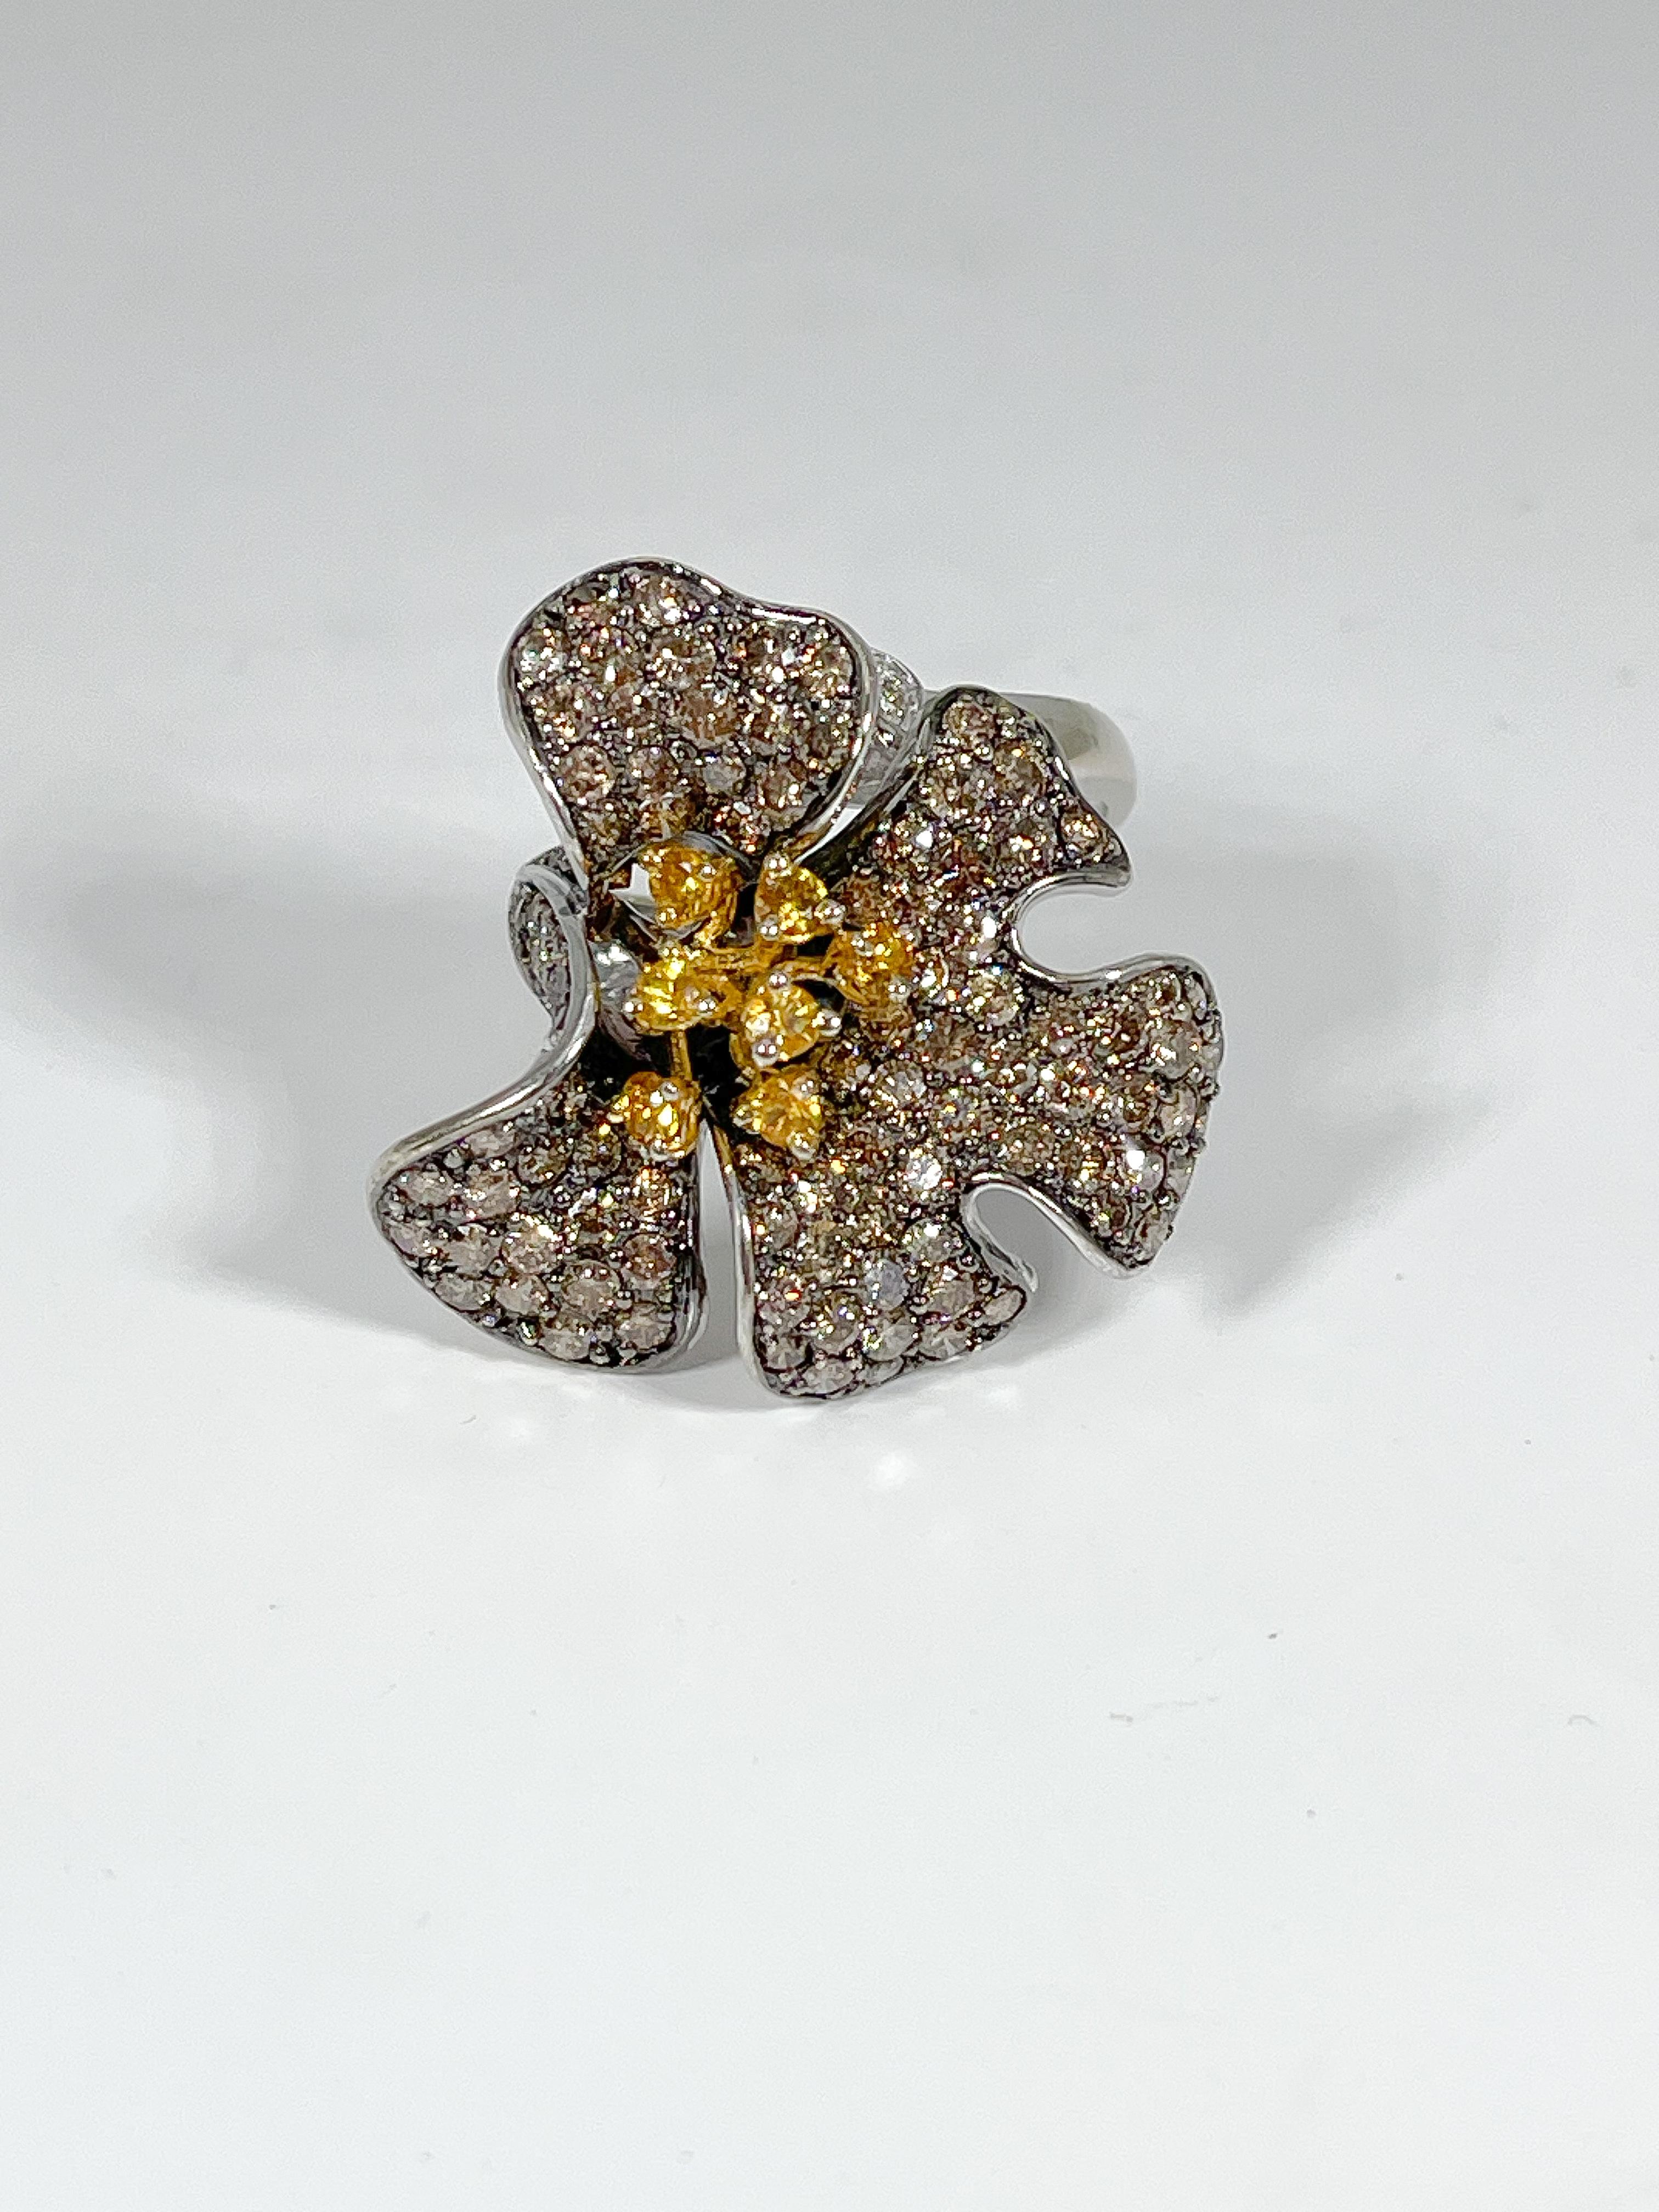 14k two toned flower ring with chocolate diamonds as the petals, yellow diamonds in the center, and accenting white diamonds on the leaf. Ring is a size 8 3/4, measures 28.6x26.9 mm, and weighs 10.28 grams. 